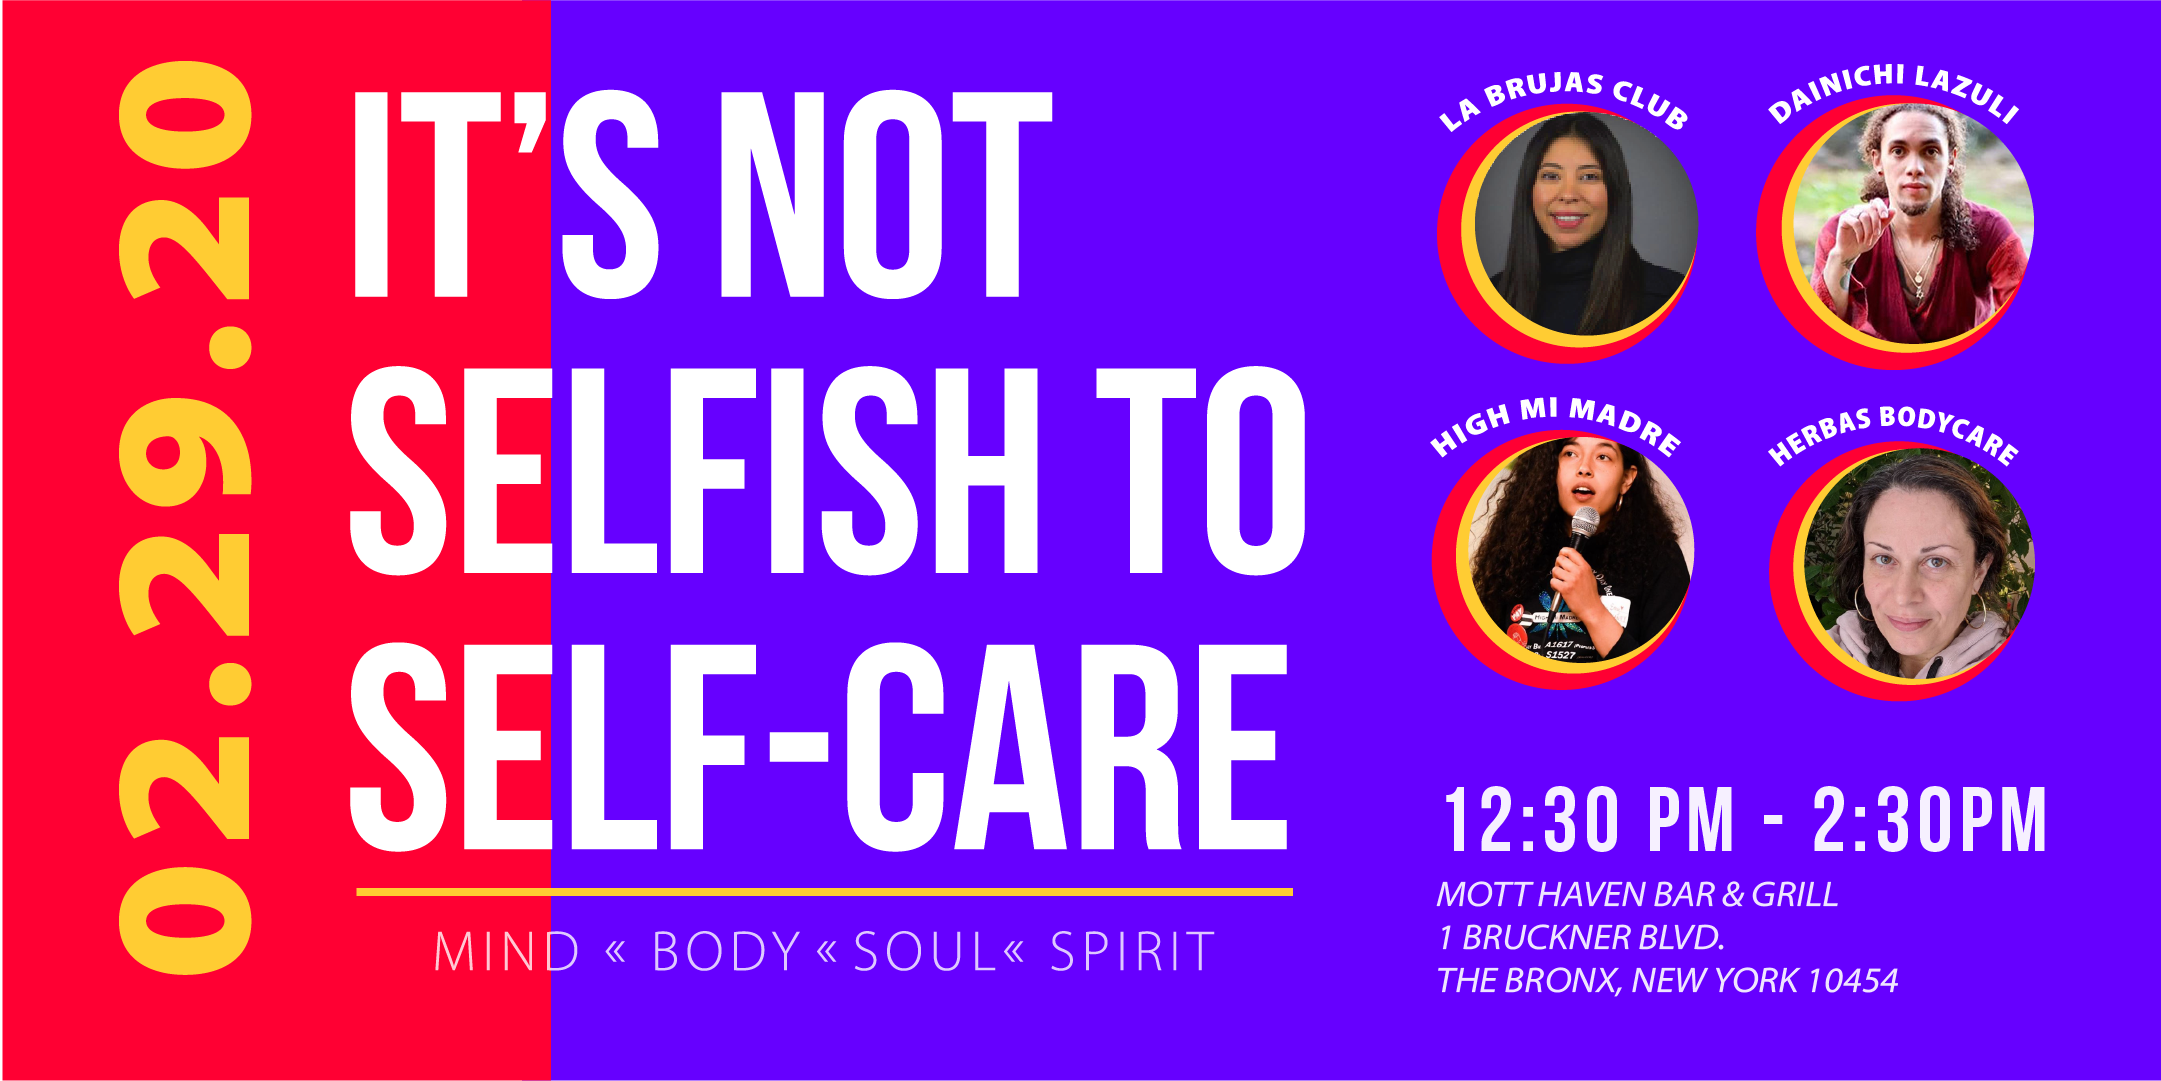 It's not SELFISH to Self-Care | Self-Exploration event in the Bronx | FREE